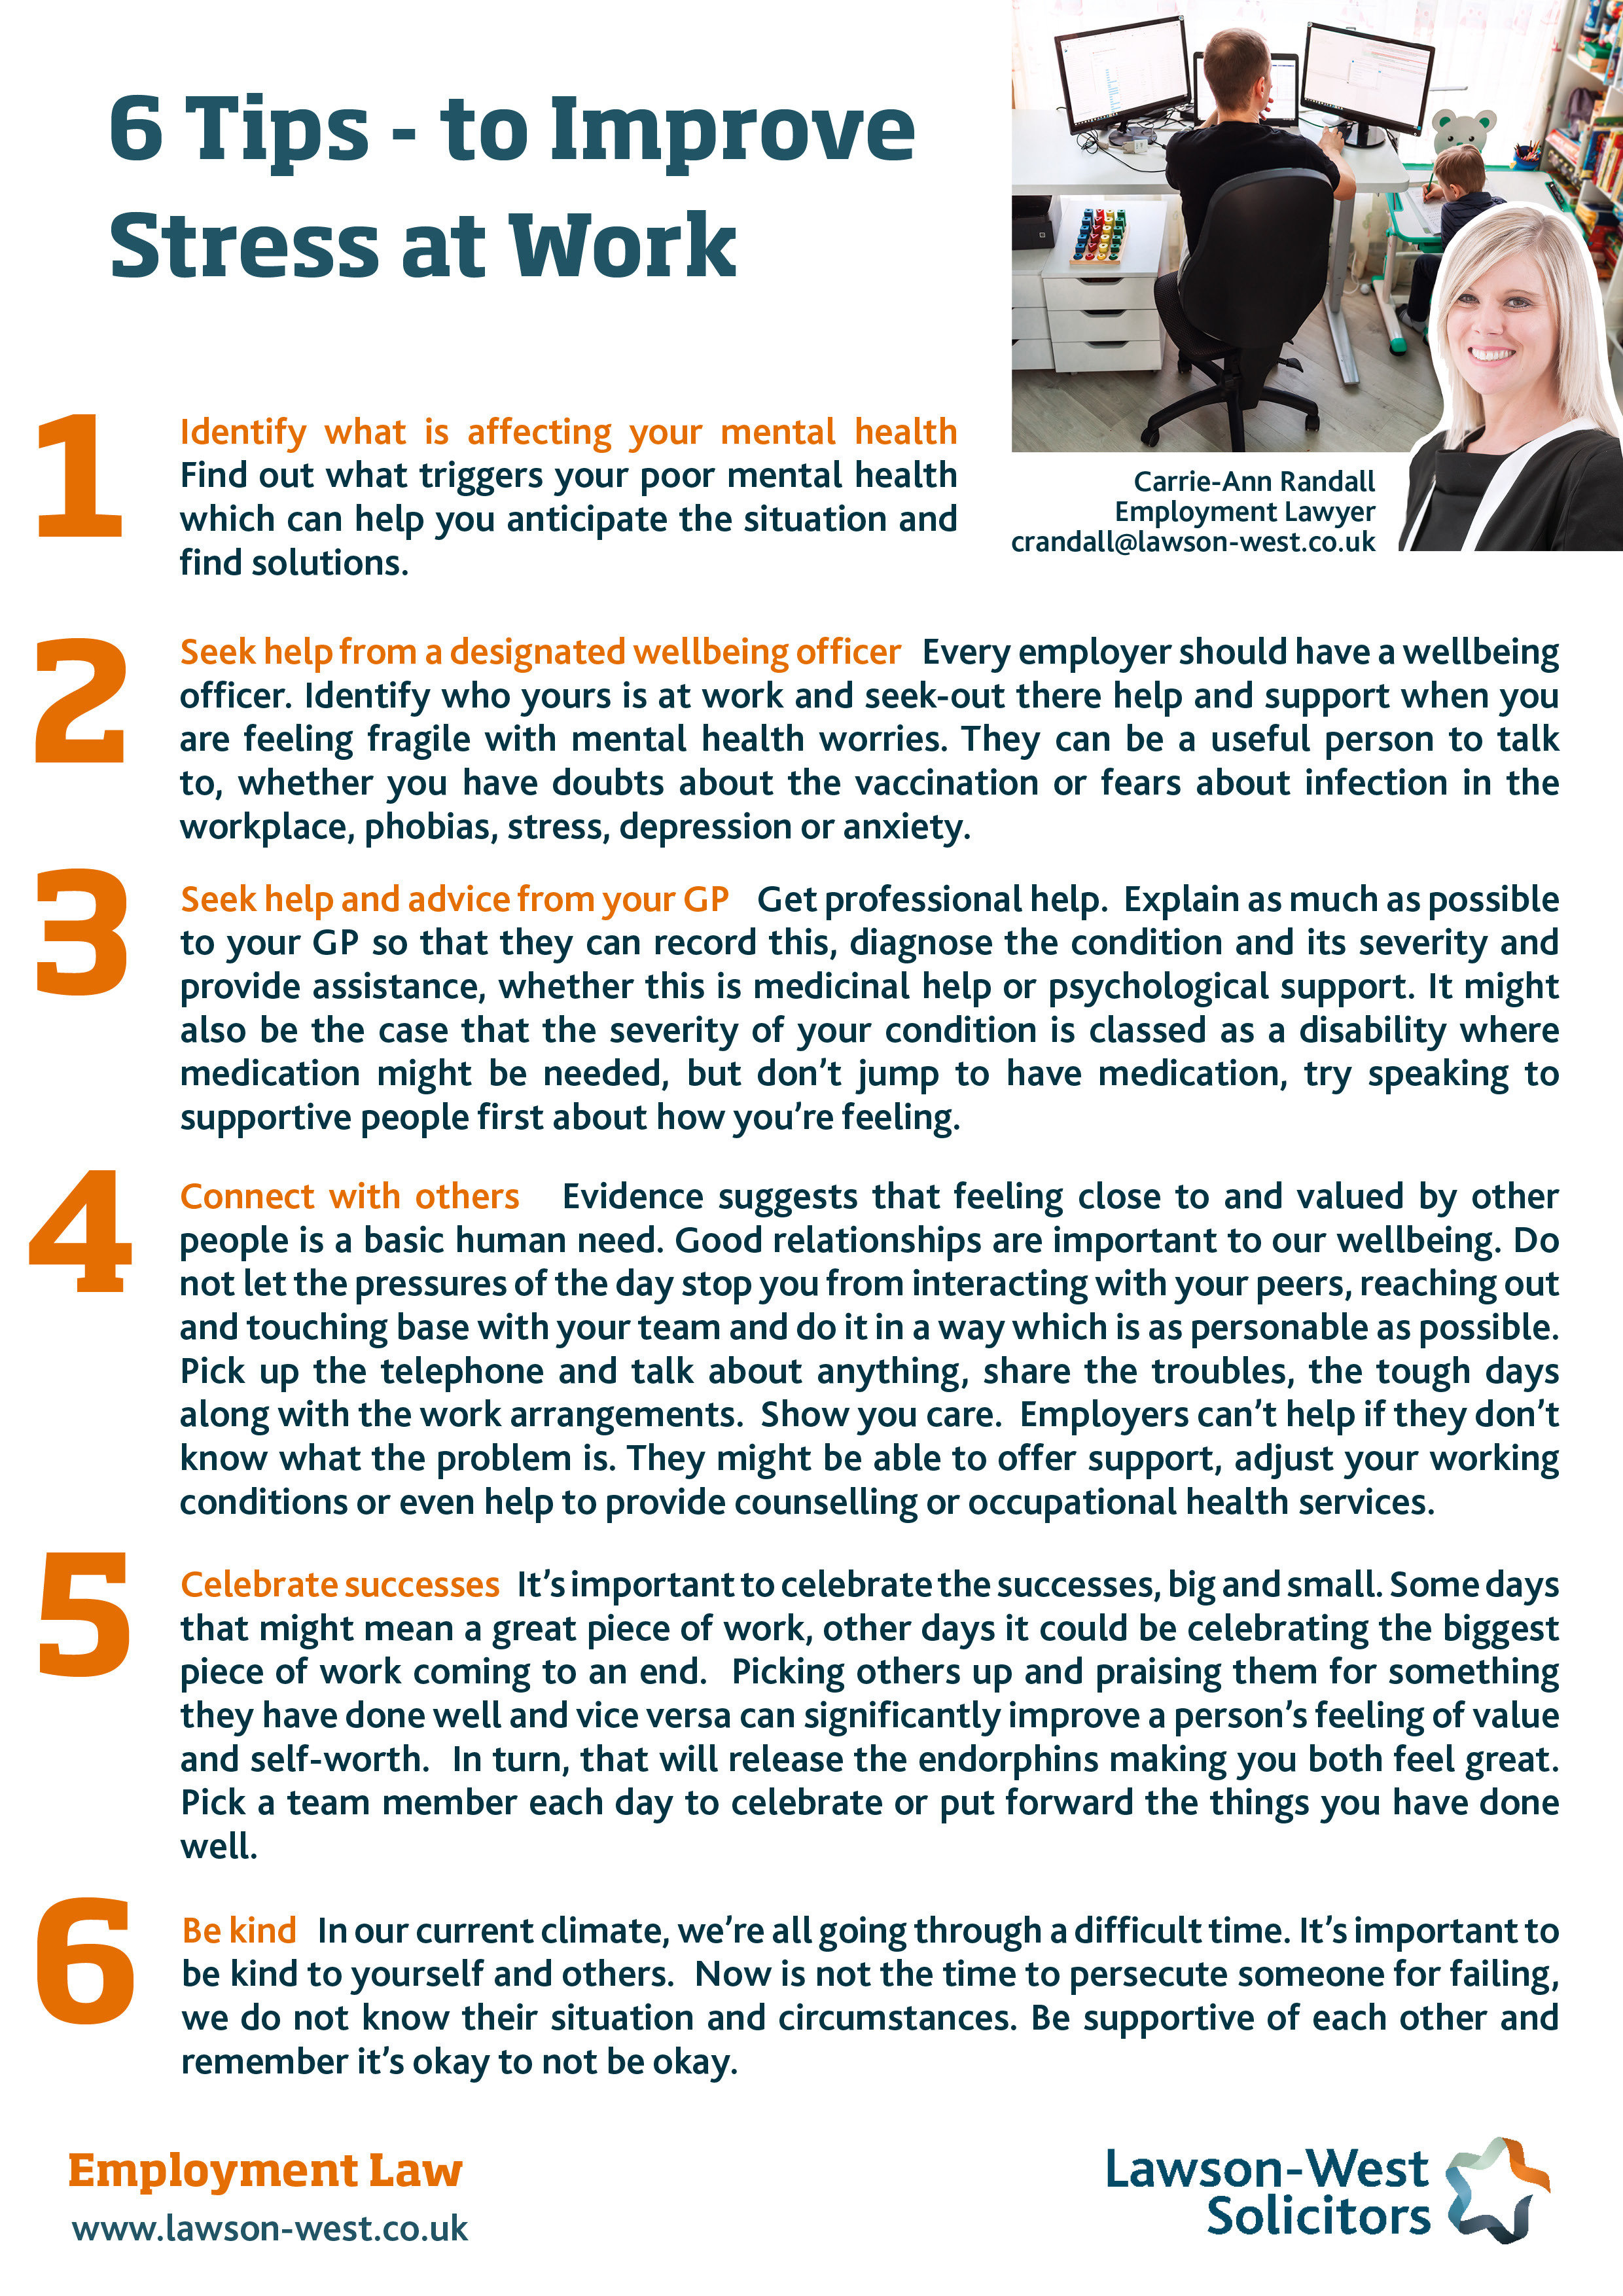 6 Steps to Manage Stress at Work in the Workplace, Leicester, Lawson-West Solicitors